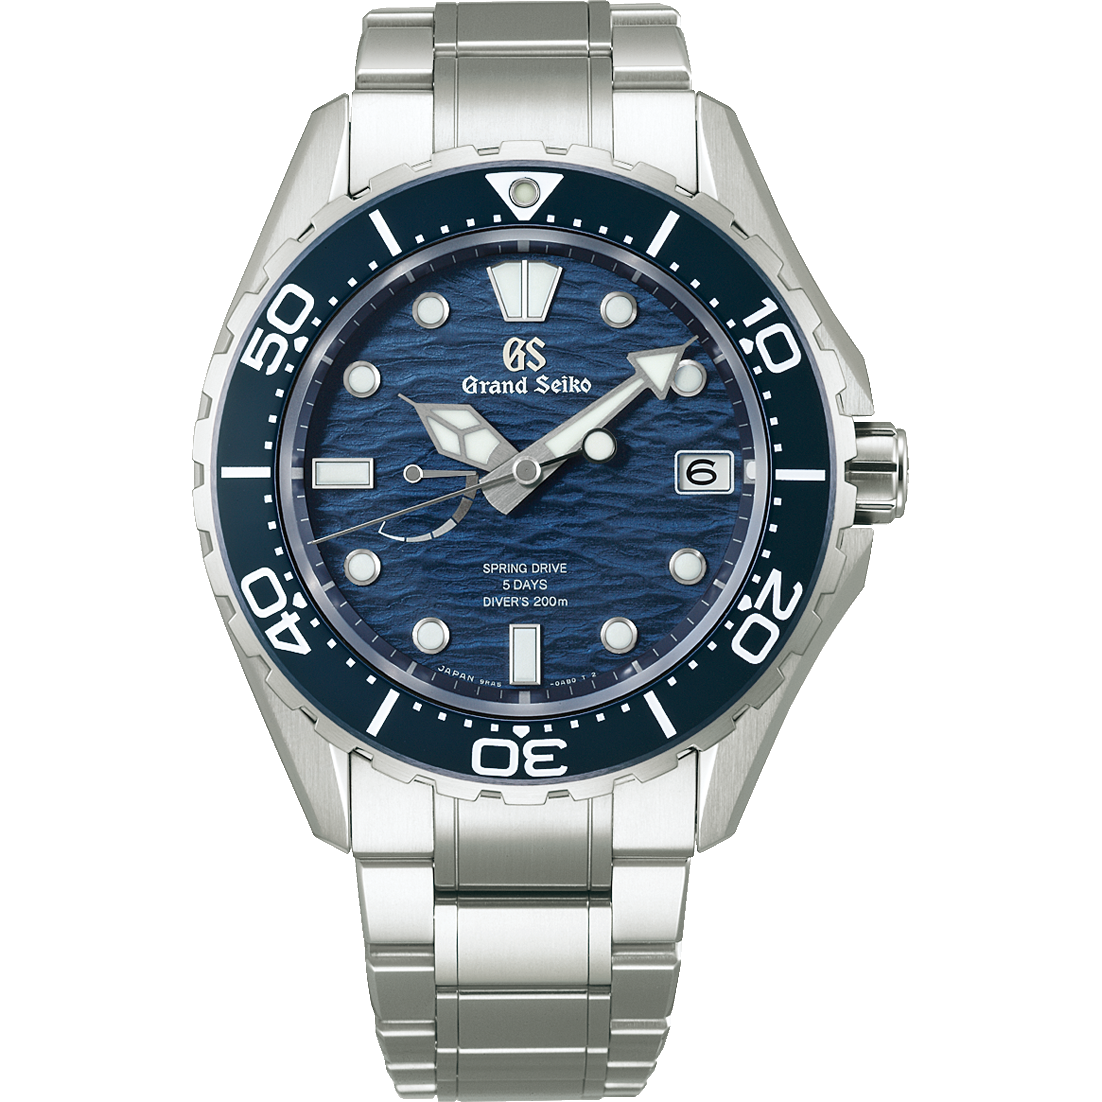 Grand Seiko 'Ushio' Blue - Spring Drive Diver's Watch | Seiko Boutique |  The Official UK Online Store